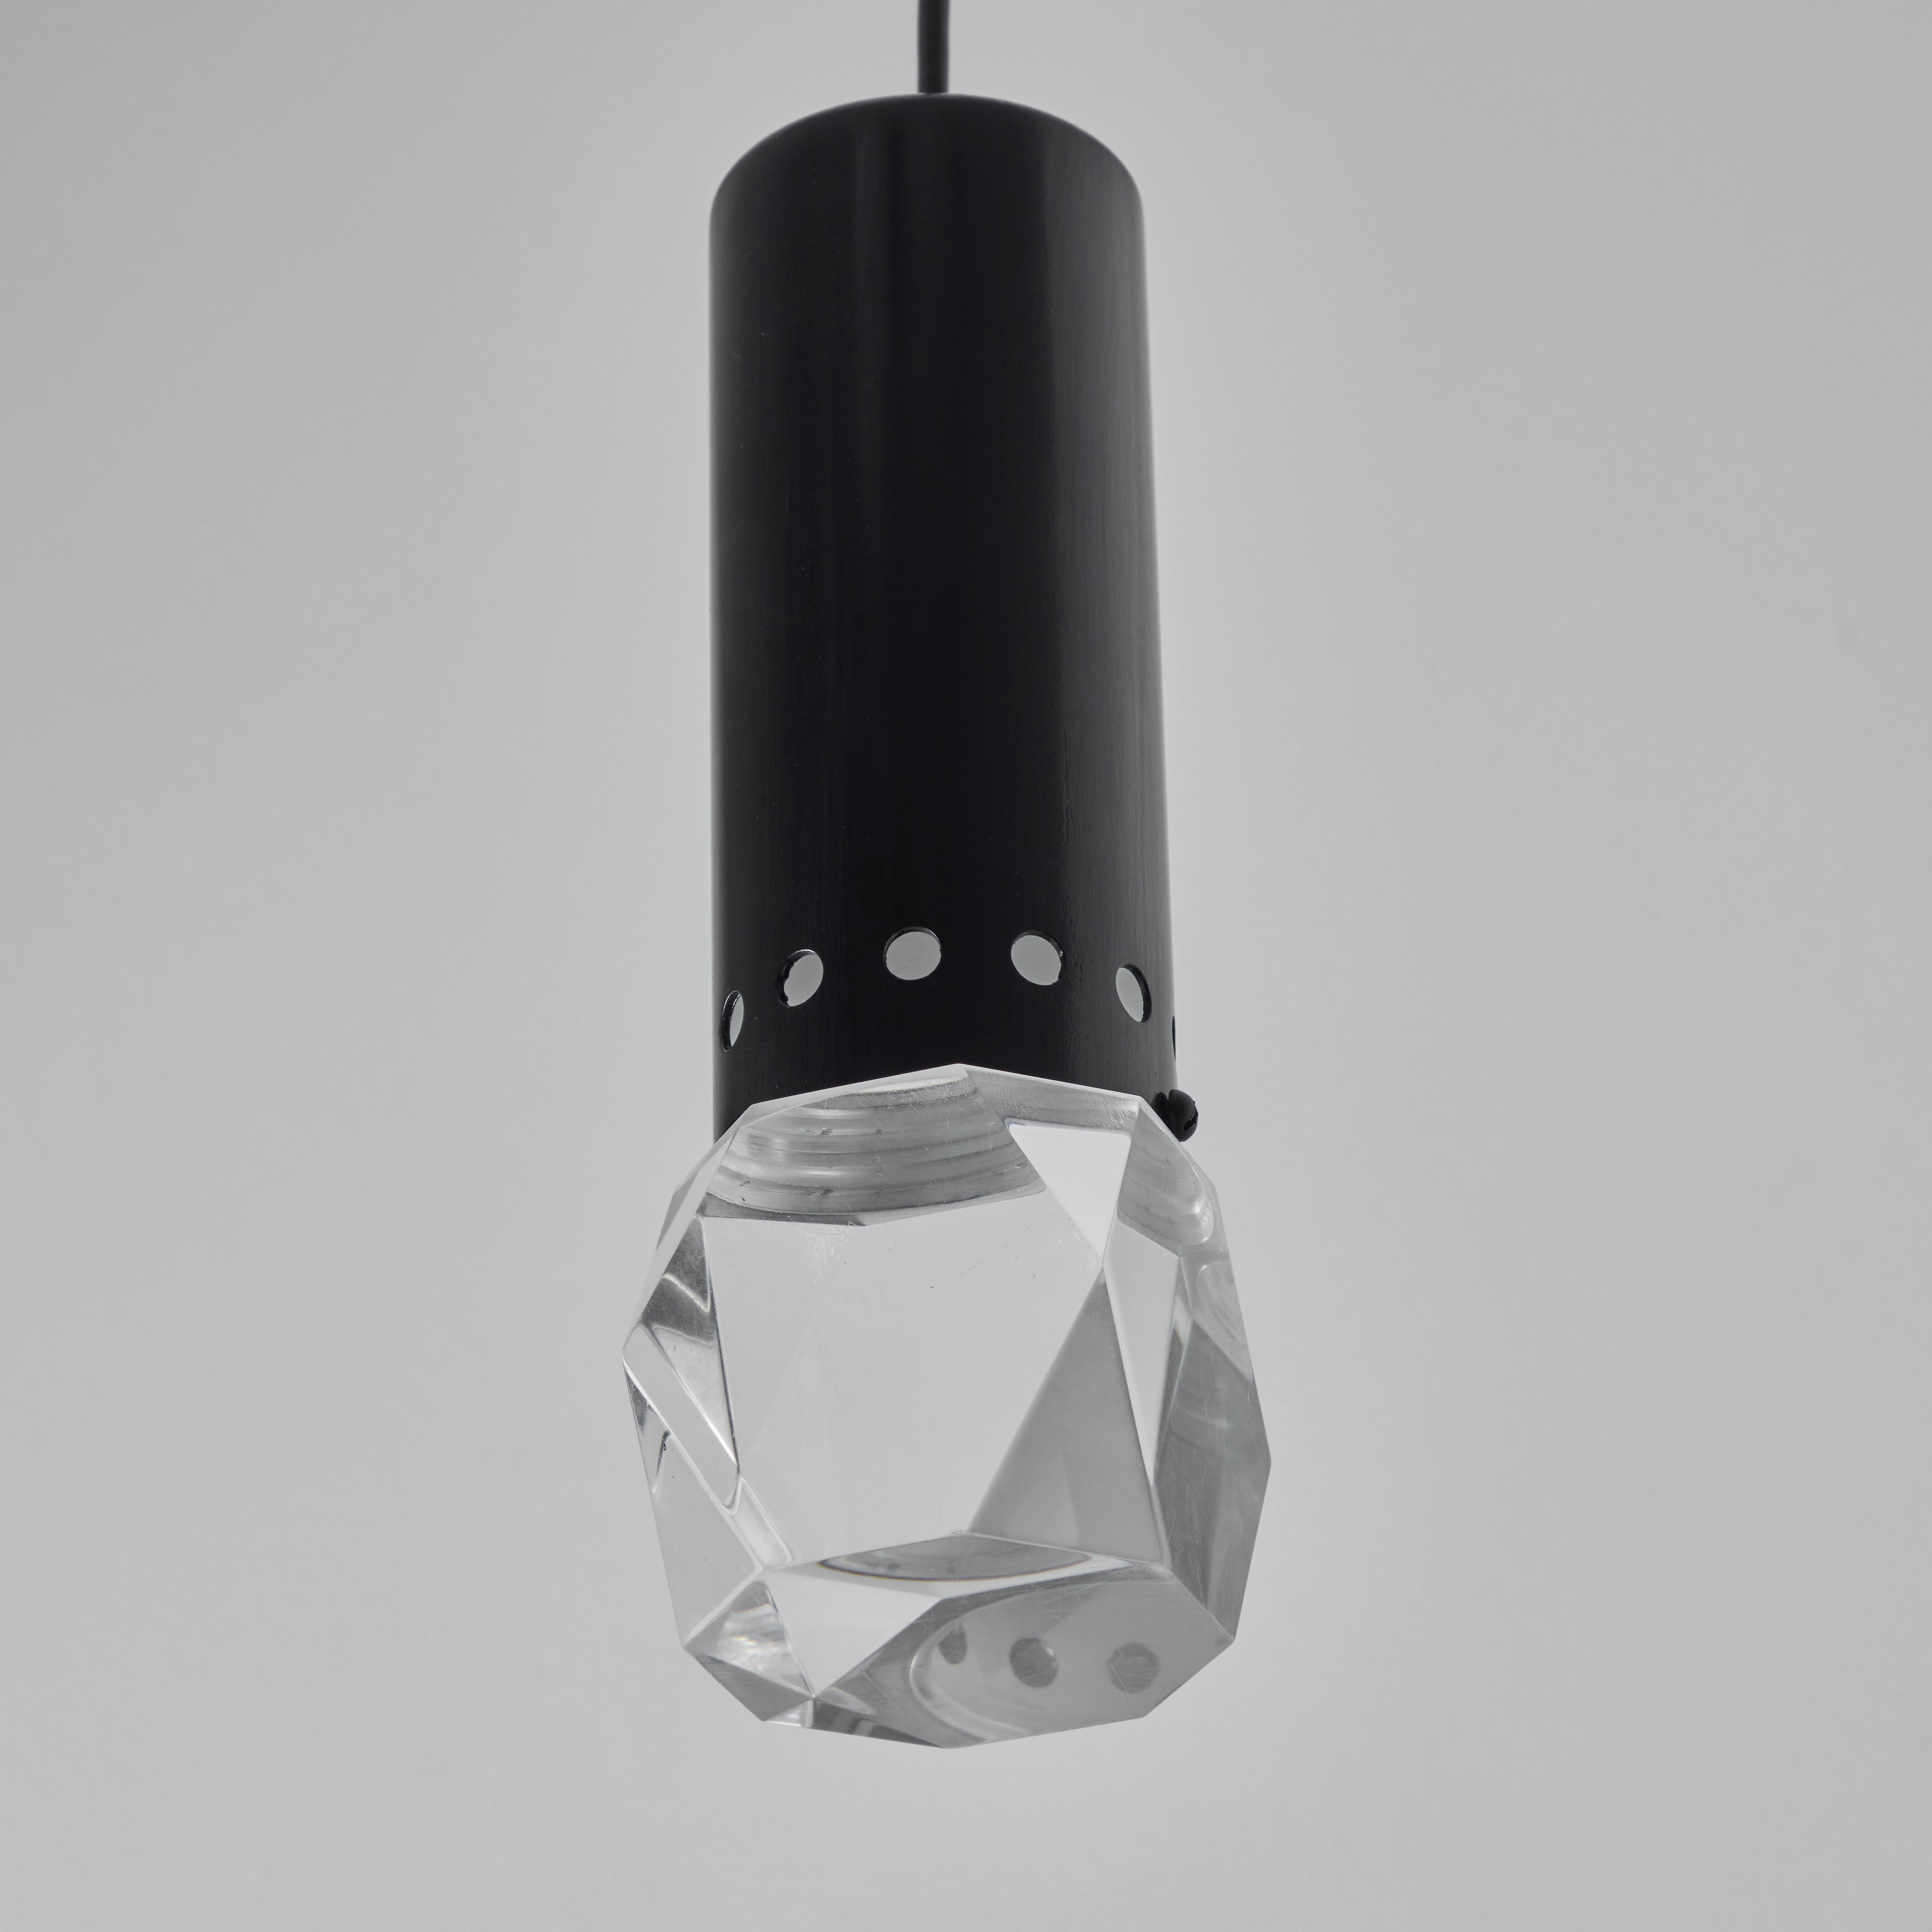 Painted 1960s Stilnovo Faceted Diffuser Pendant Lamp For Sale